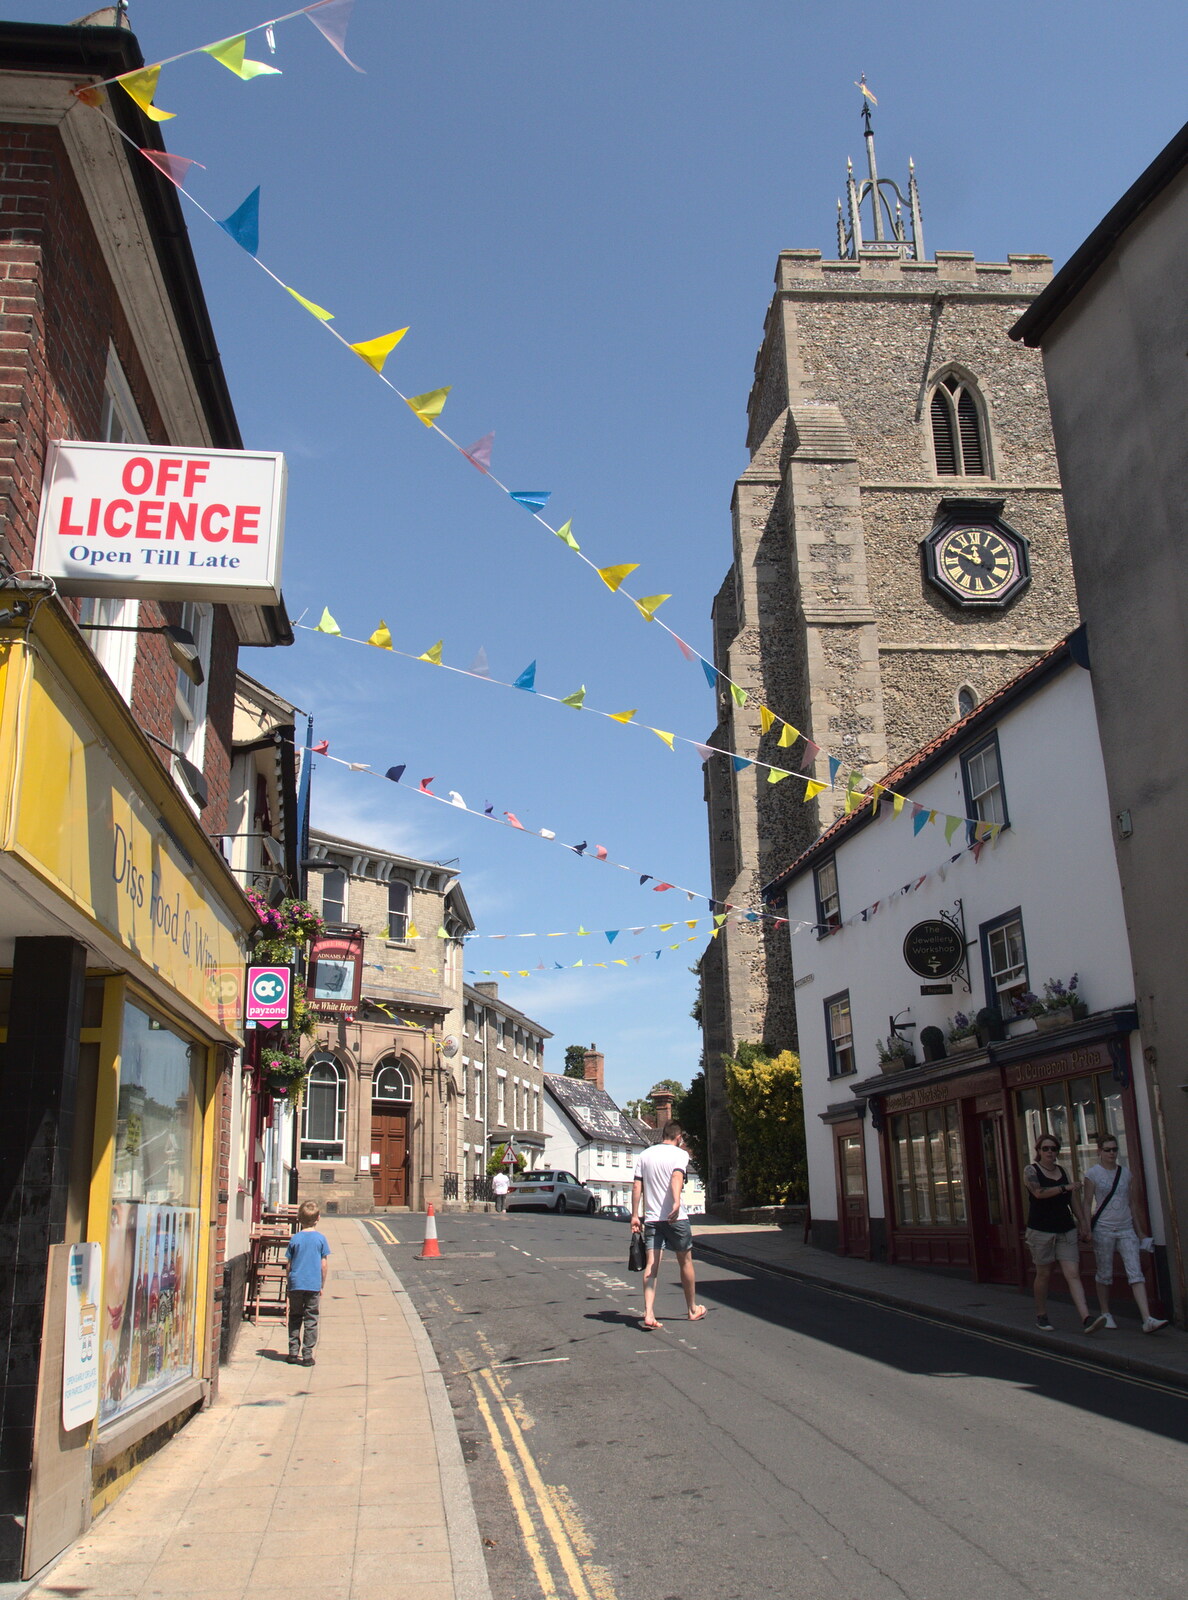 Mount Street in Diss has got the bunting out from The BSSC at The Greyhound, Underpants and Moths - Tibenham, Norfolk - 6th July 2015